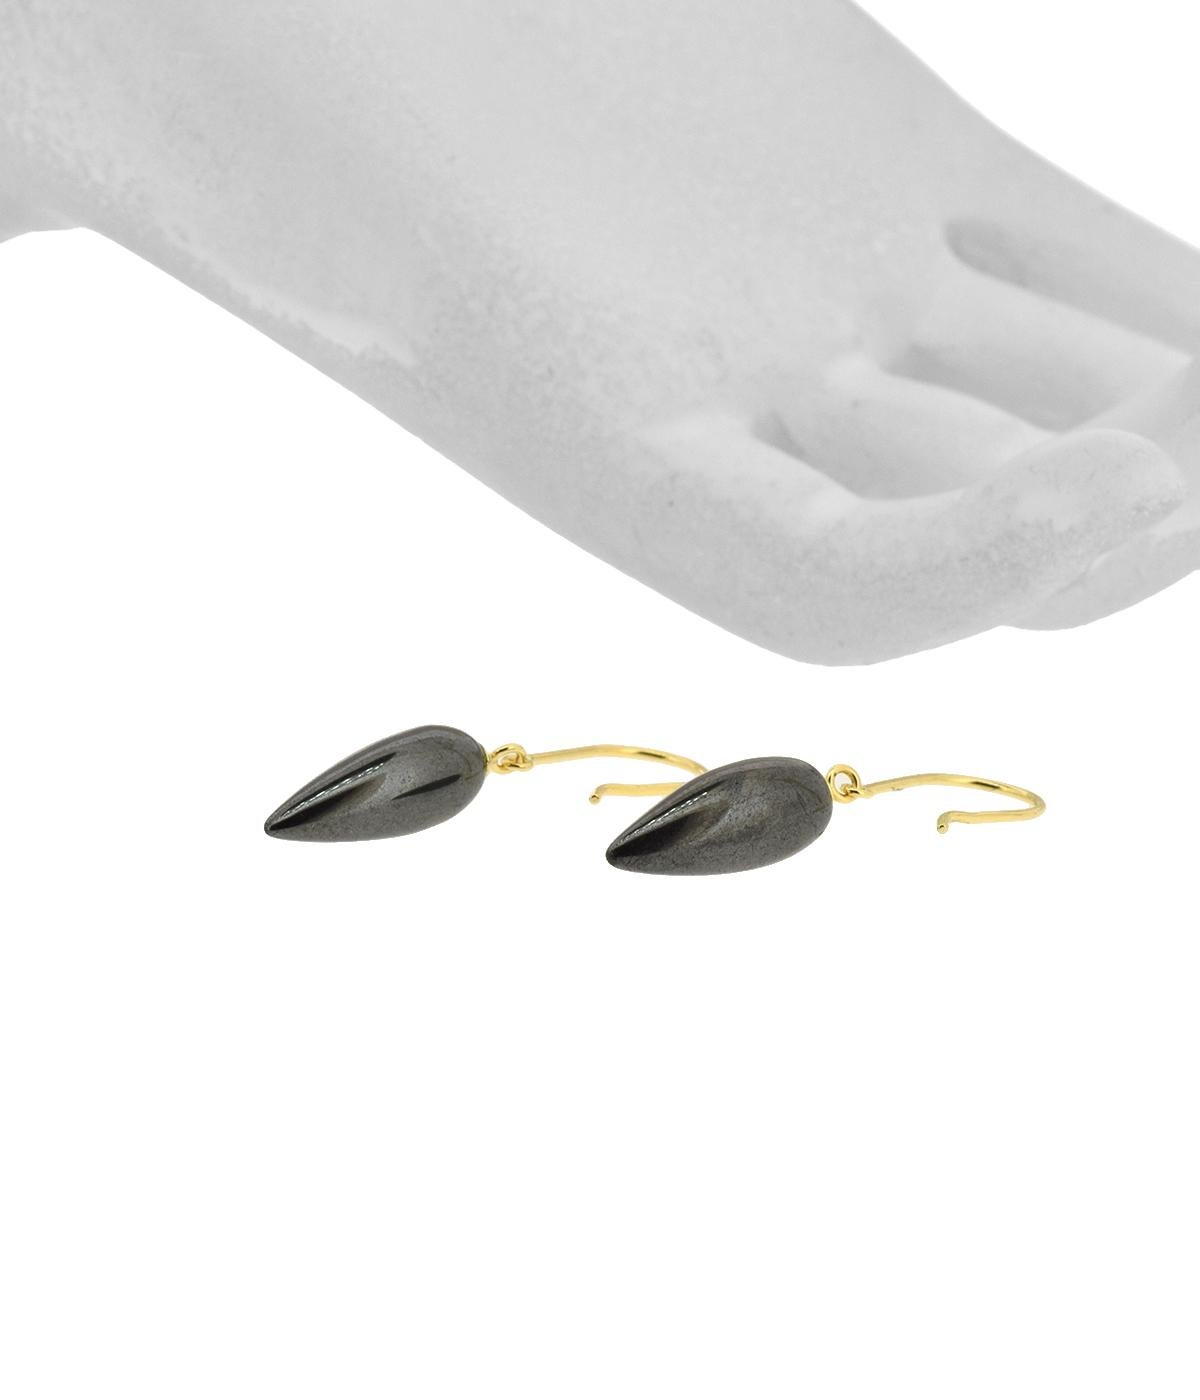 Sleek smooth hematite drops with 14K gold wire.  A great everyday pair.

Measure  1-1/8